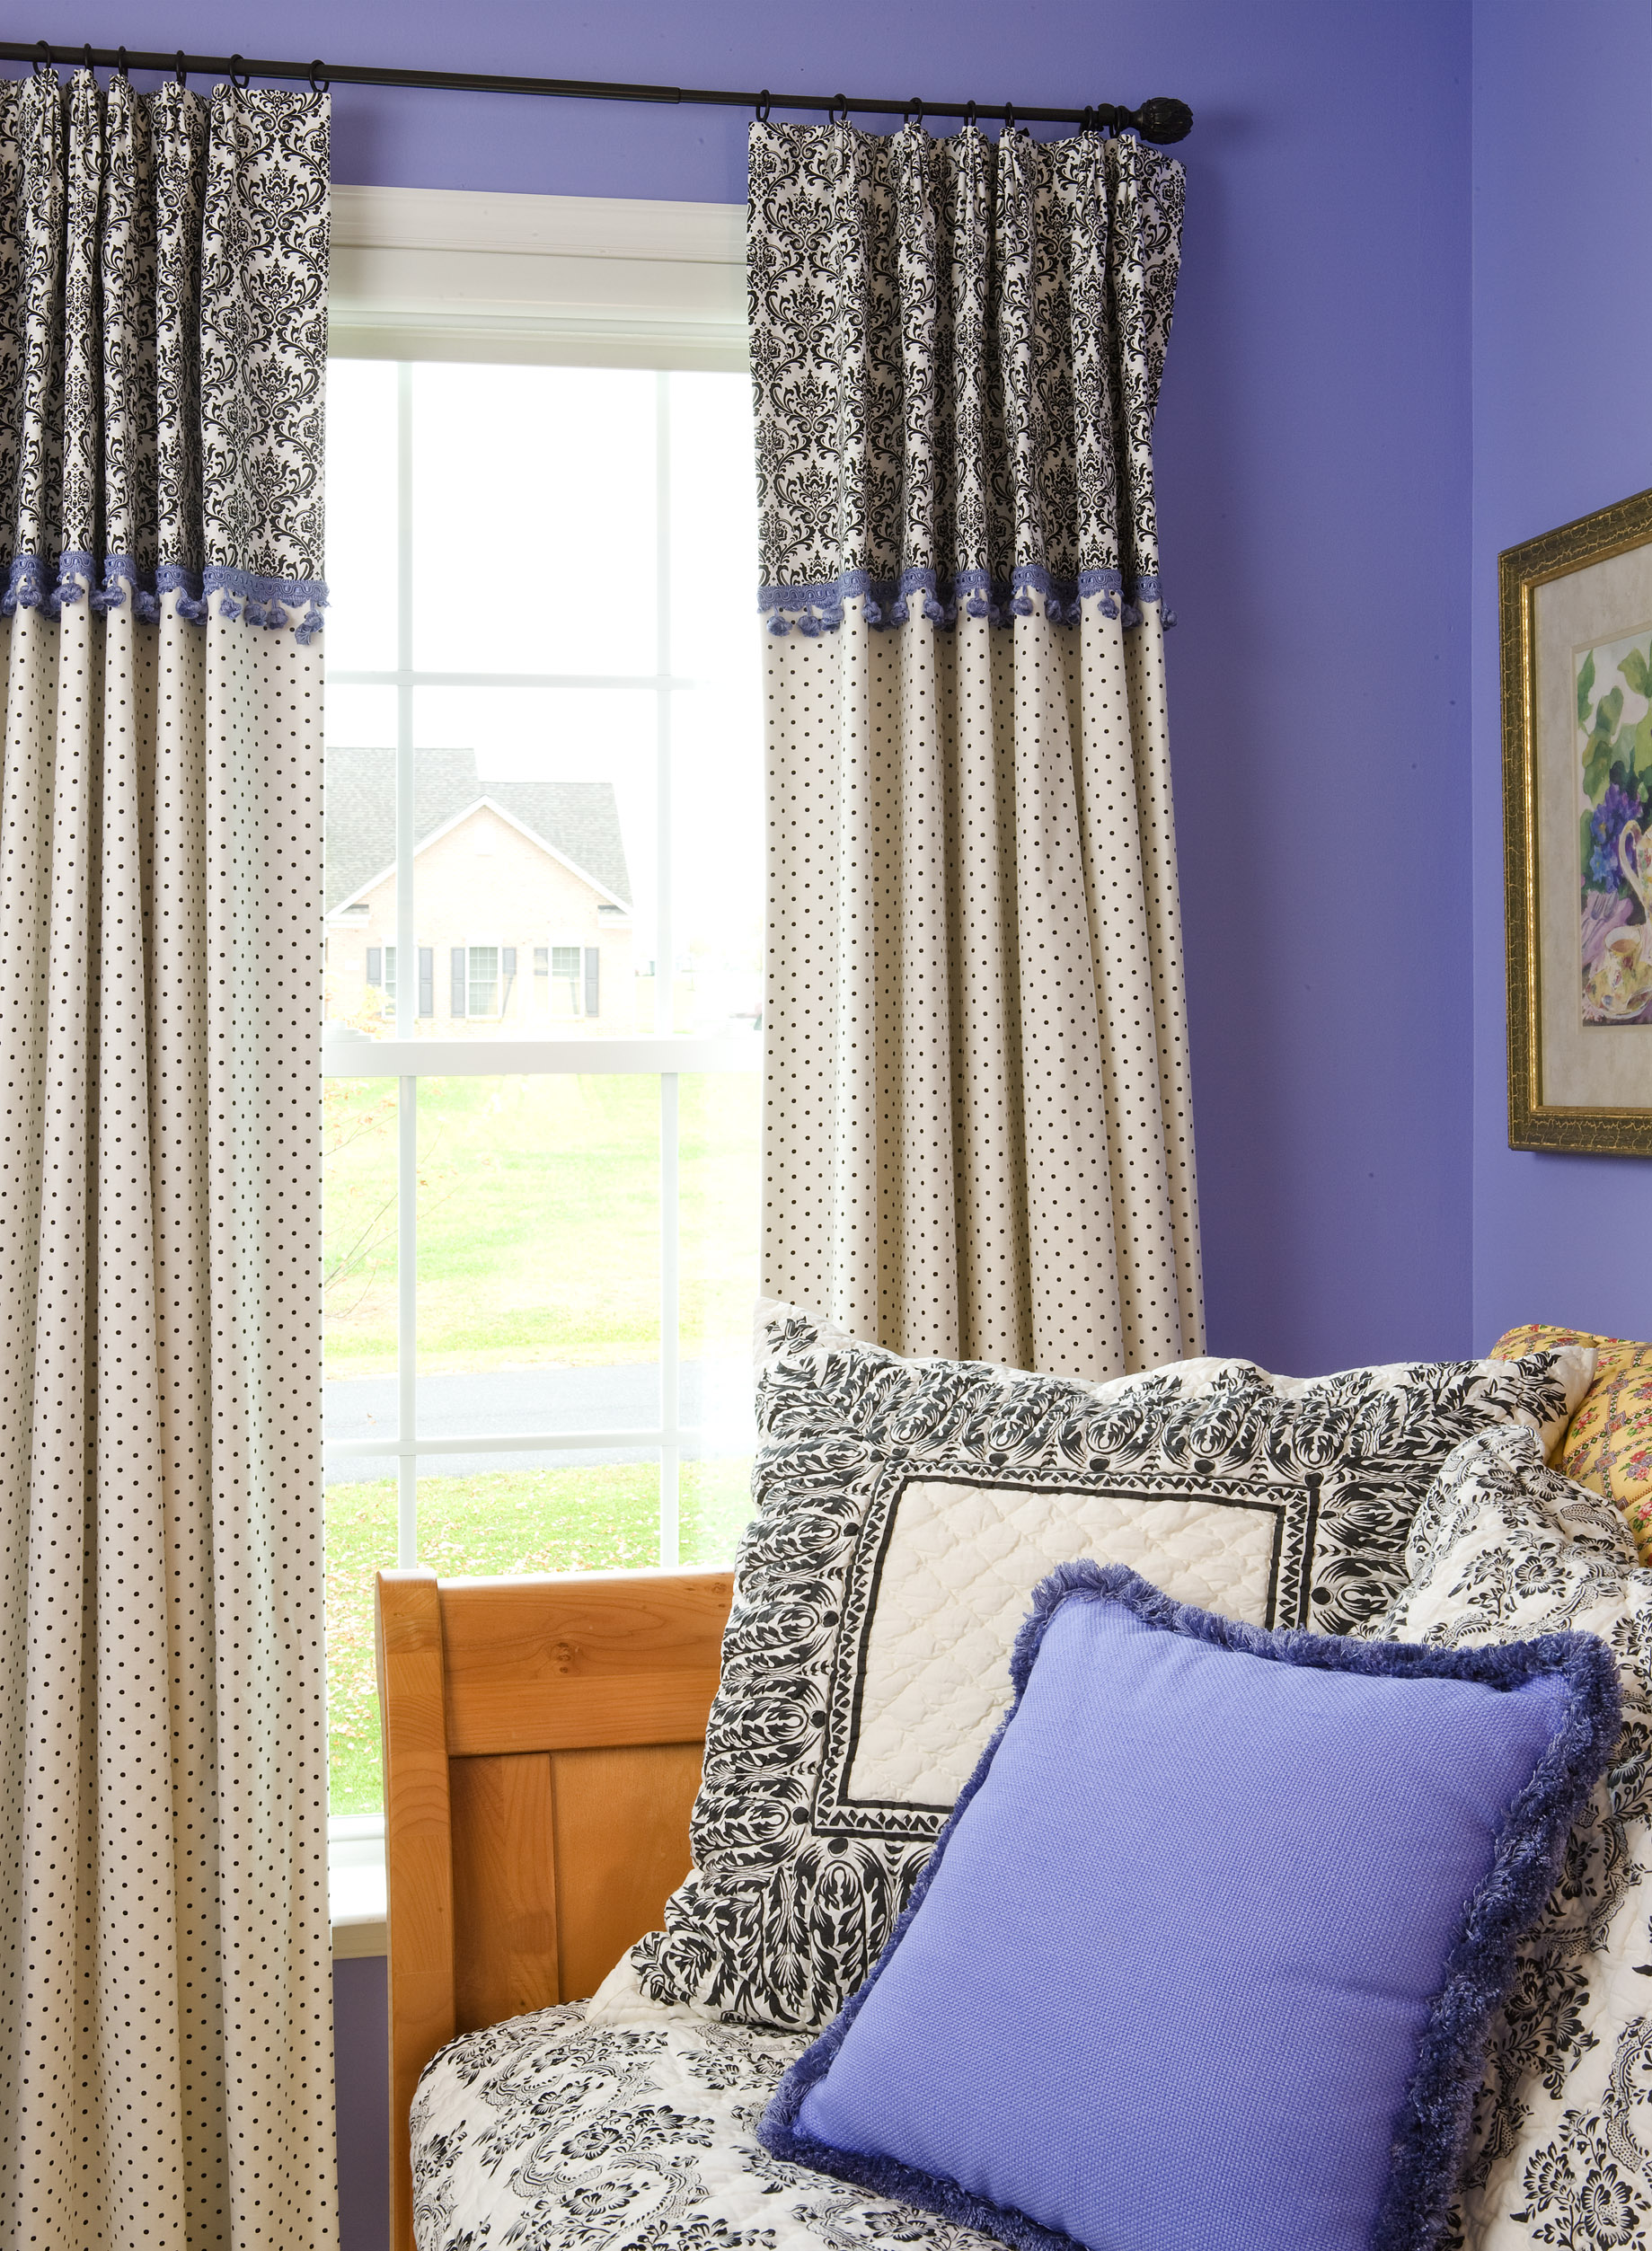 The ABC's of Decorating....T is for Terrific Window Treatment Tips ...